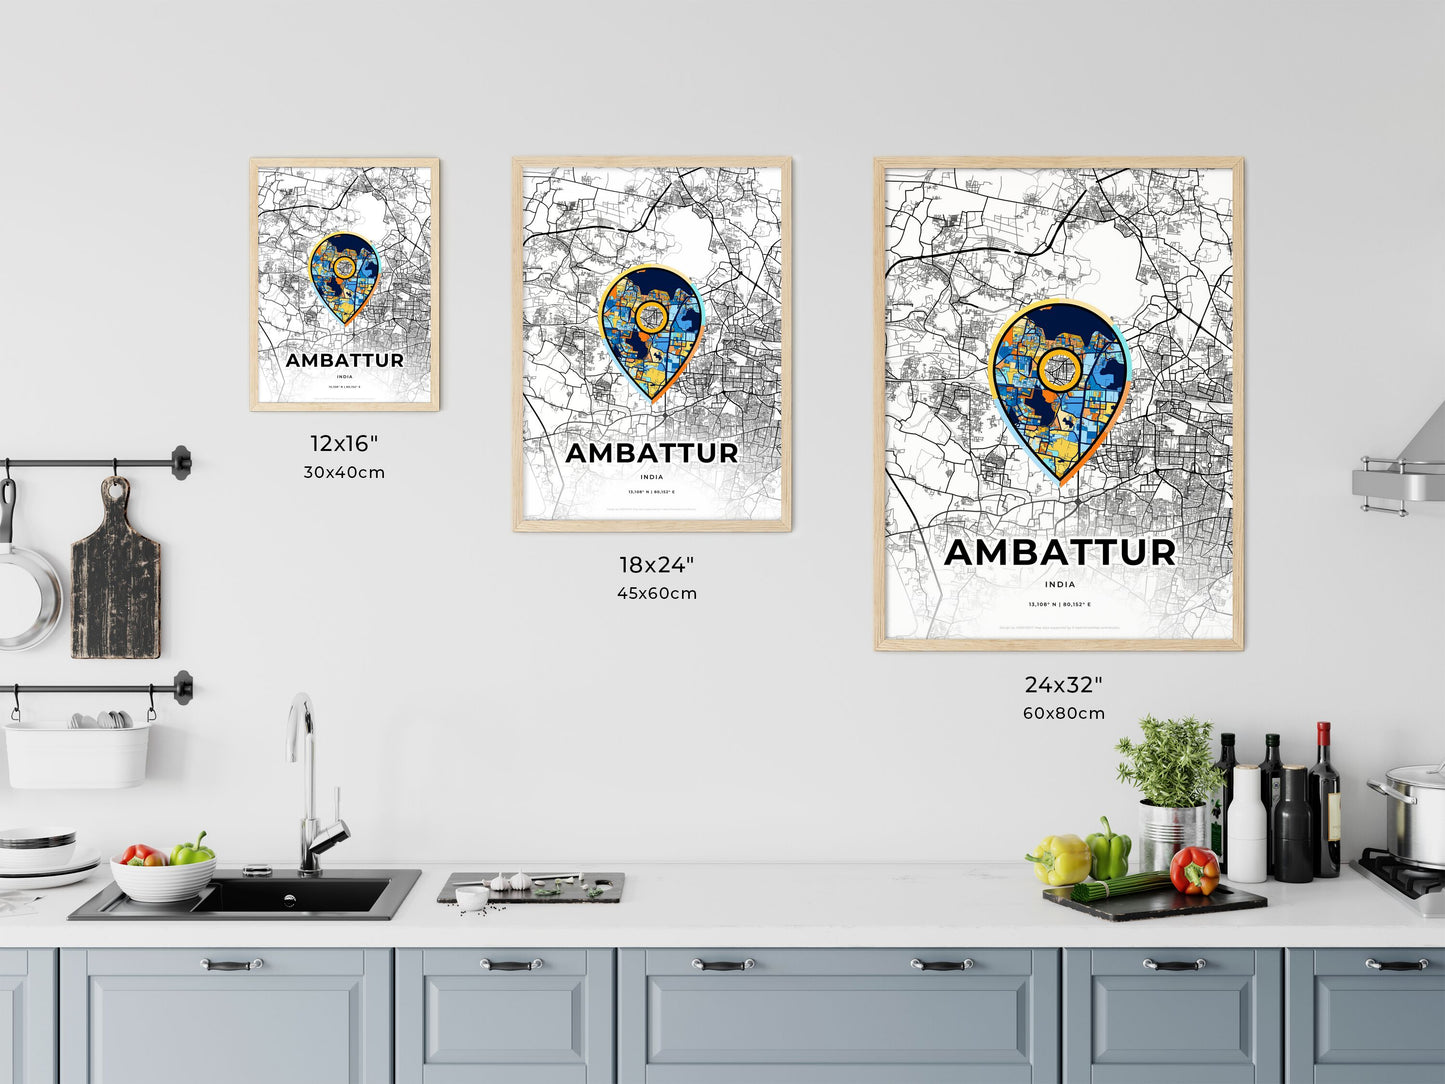 AMBATTUR INDIA minimal art map with a colorful icon. Where it all began, Couple map gift.